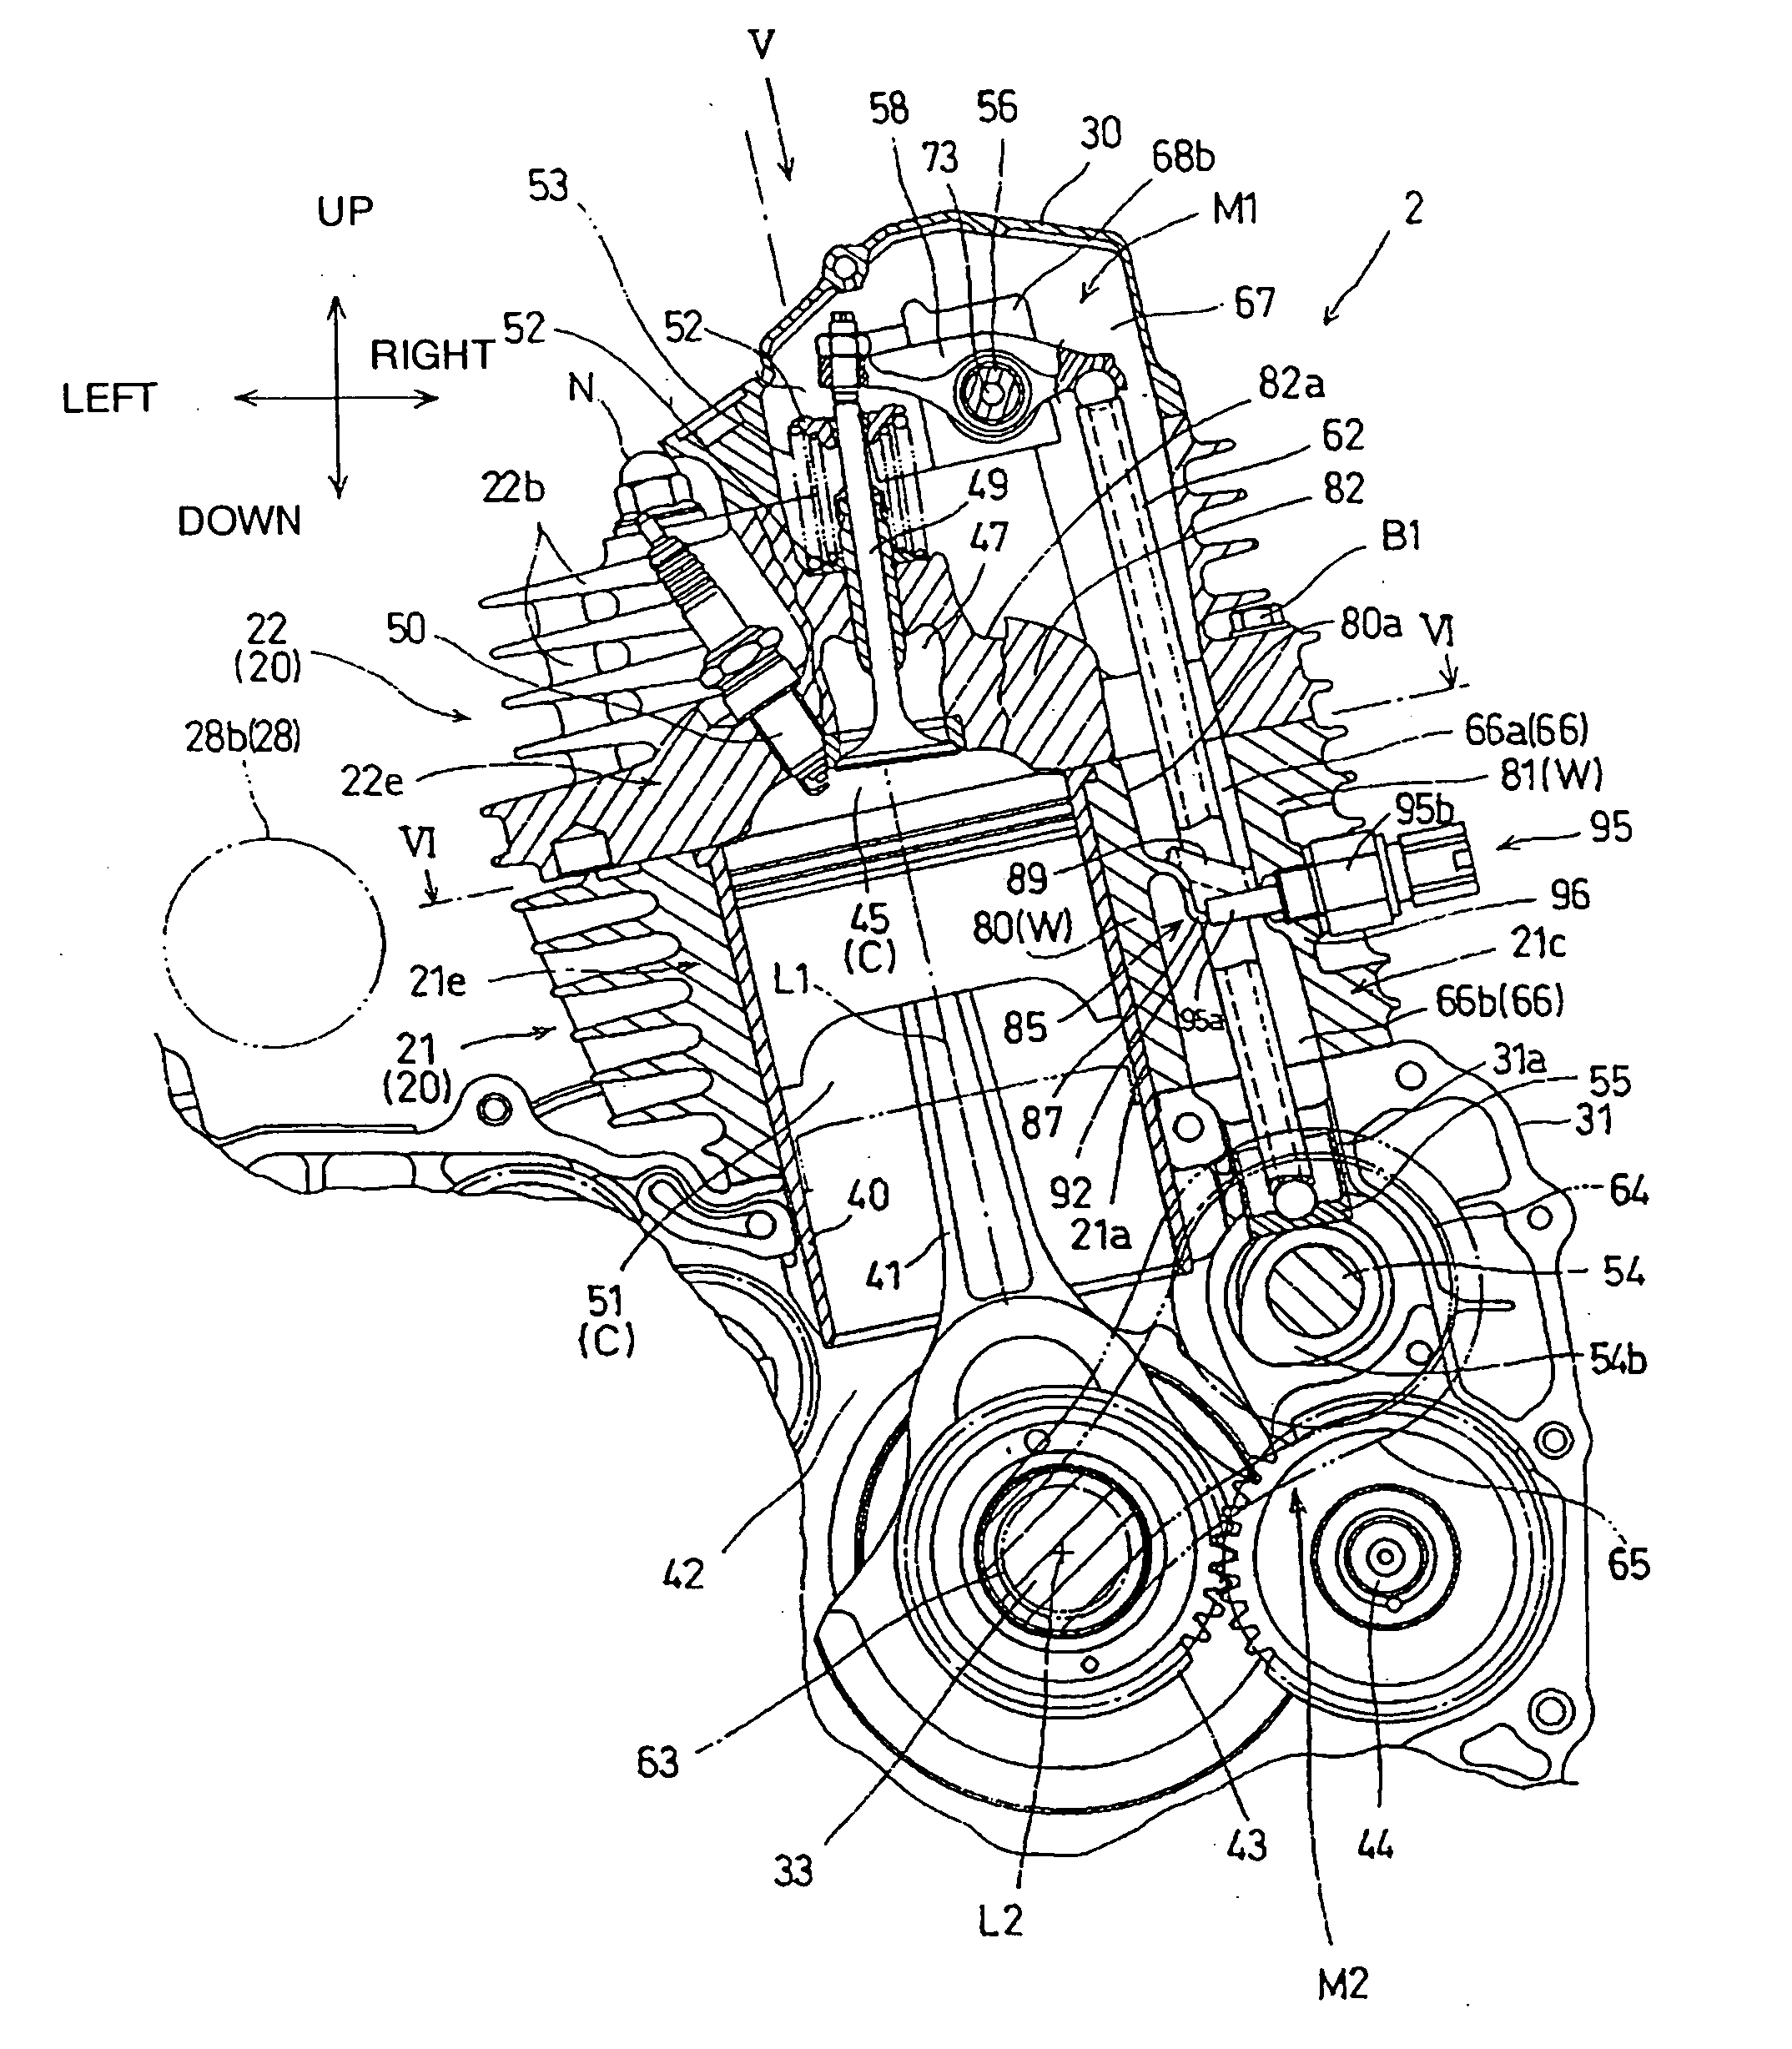 Internal combustion engine with oil temperature sensor